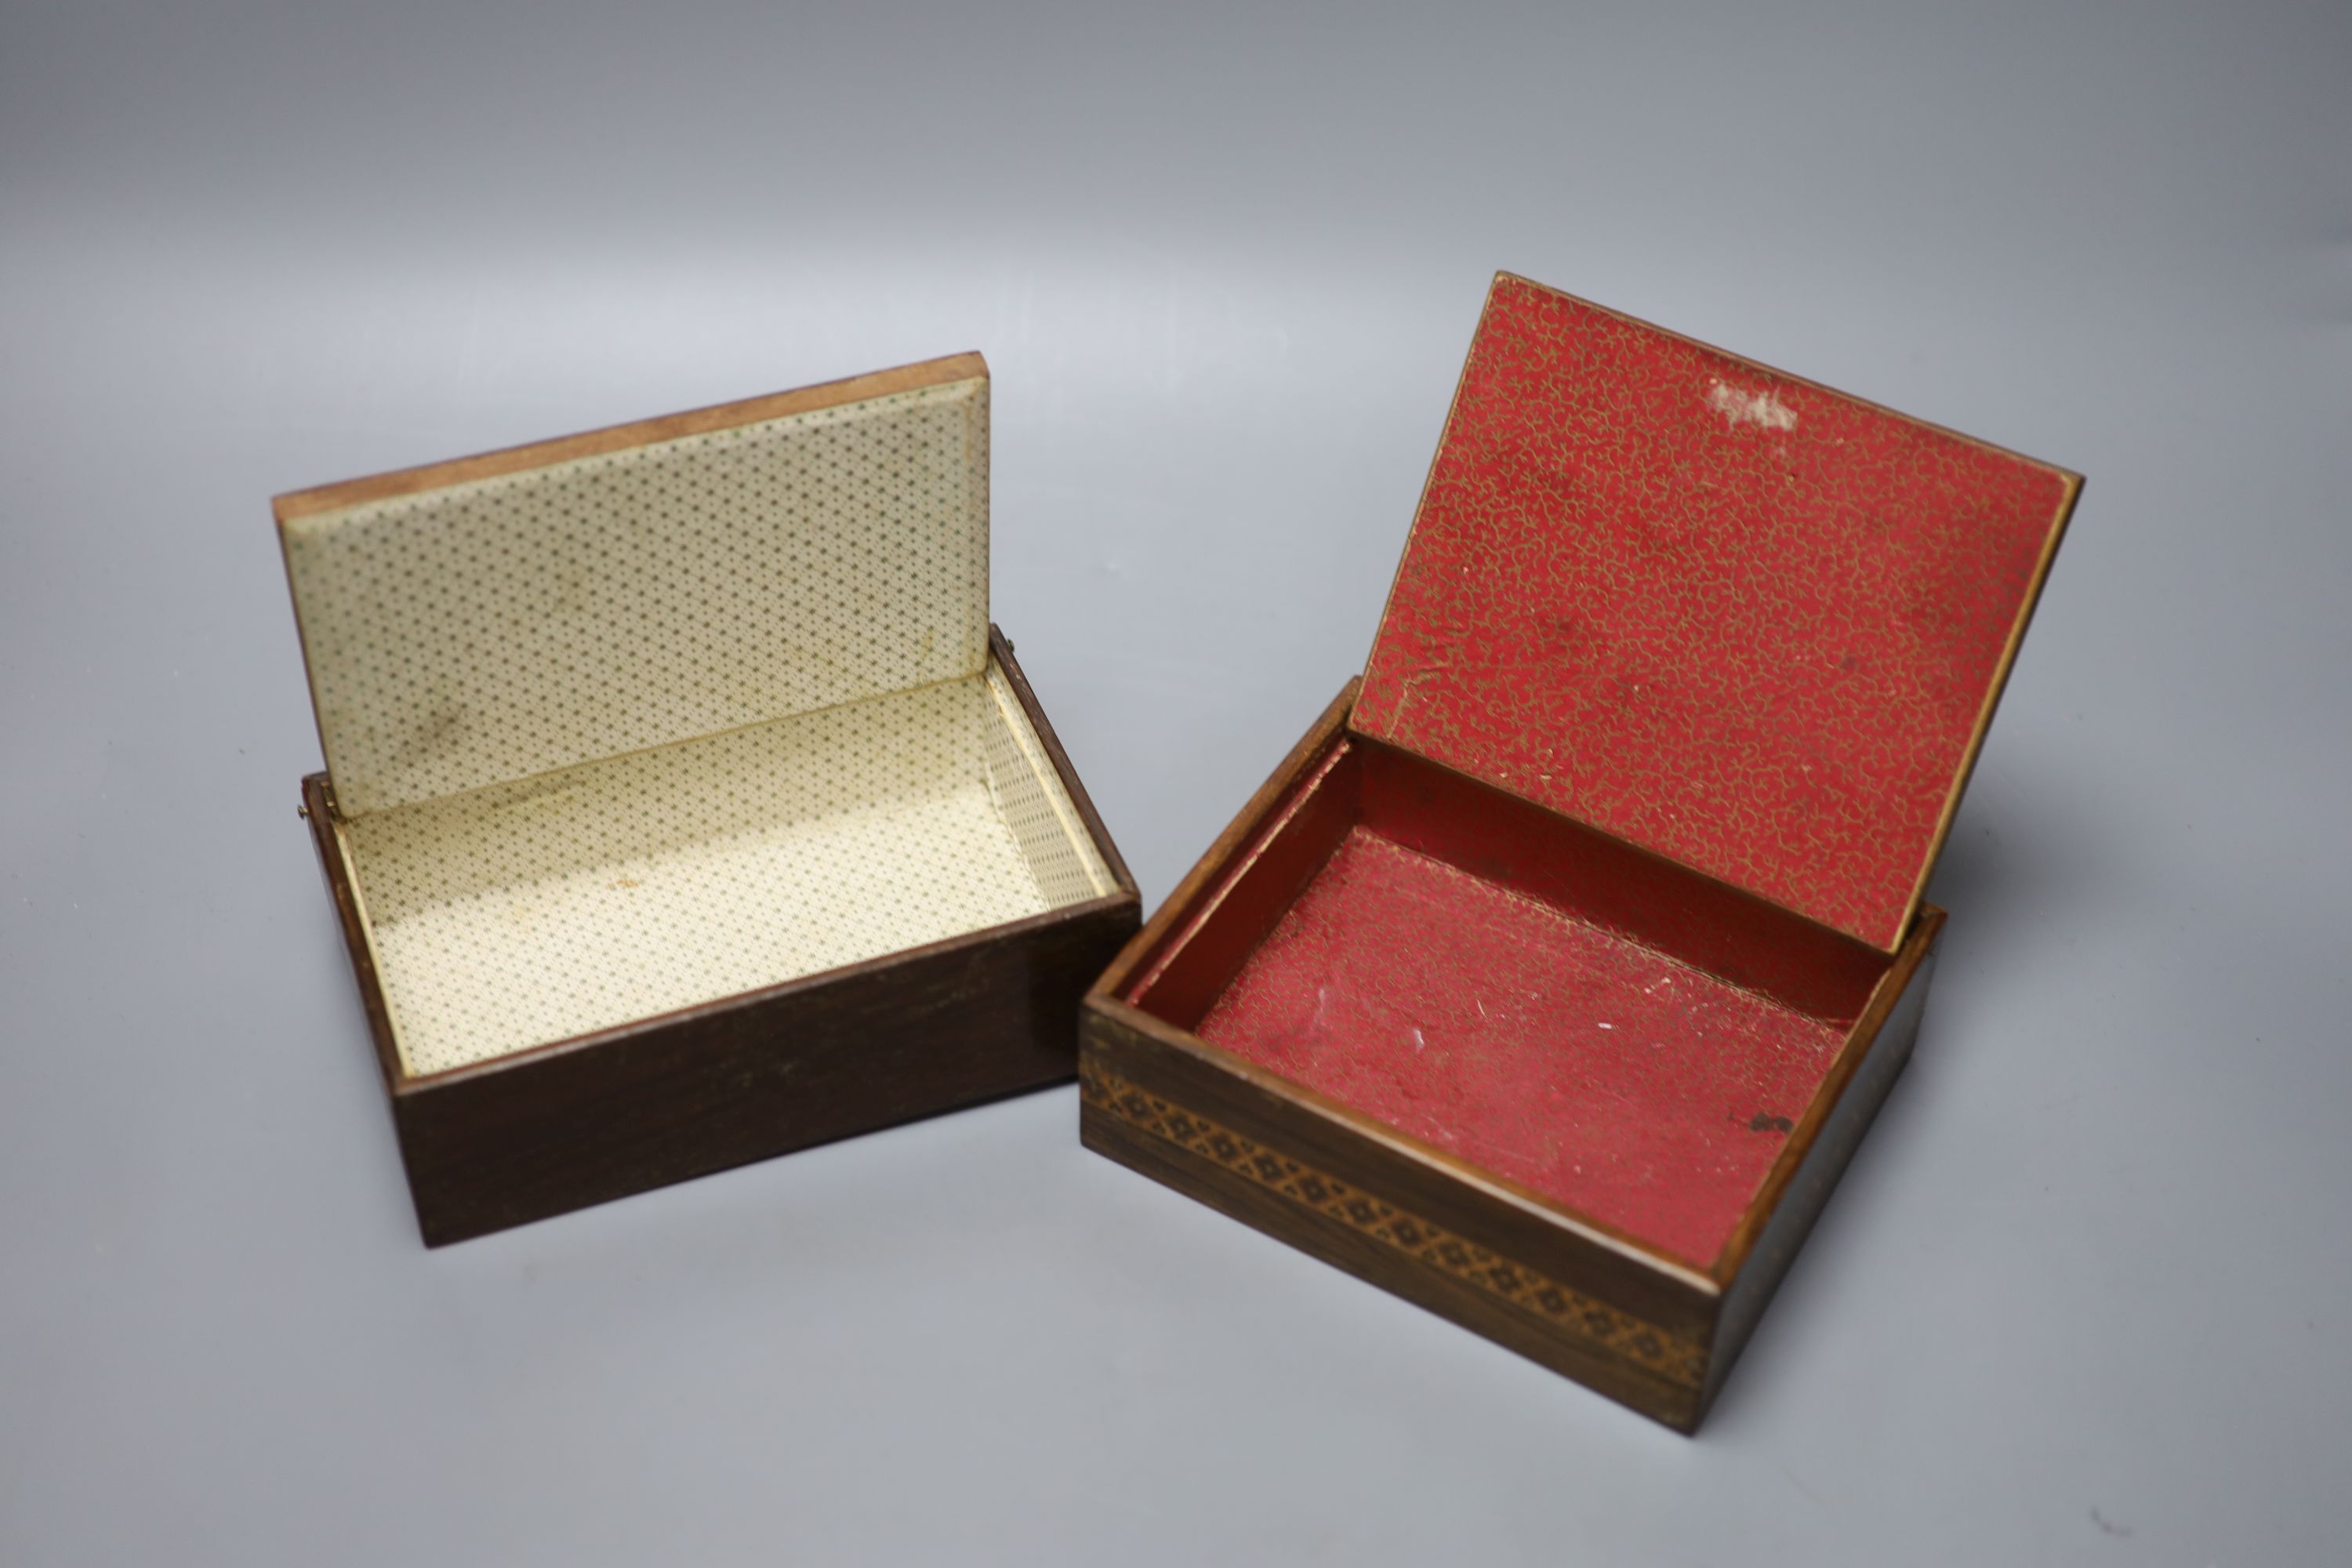 Two Tunbridge ware floral tesserae mosaic pin hinged boxes, late 19th century, 15.3 and 17cm